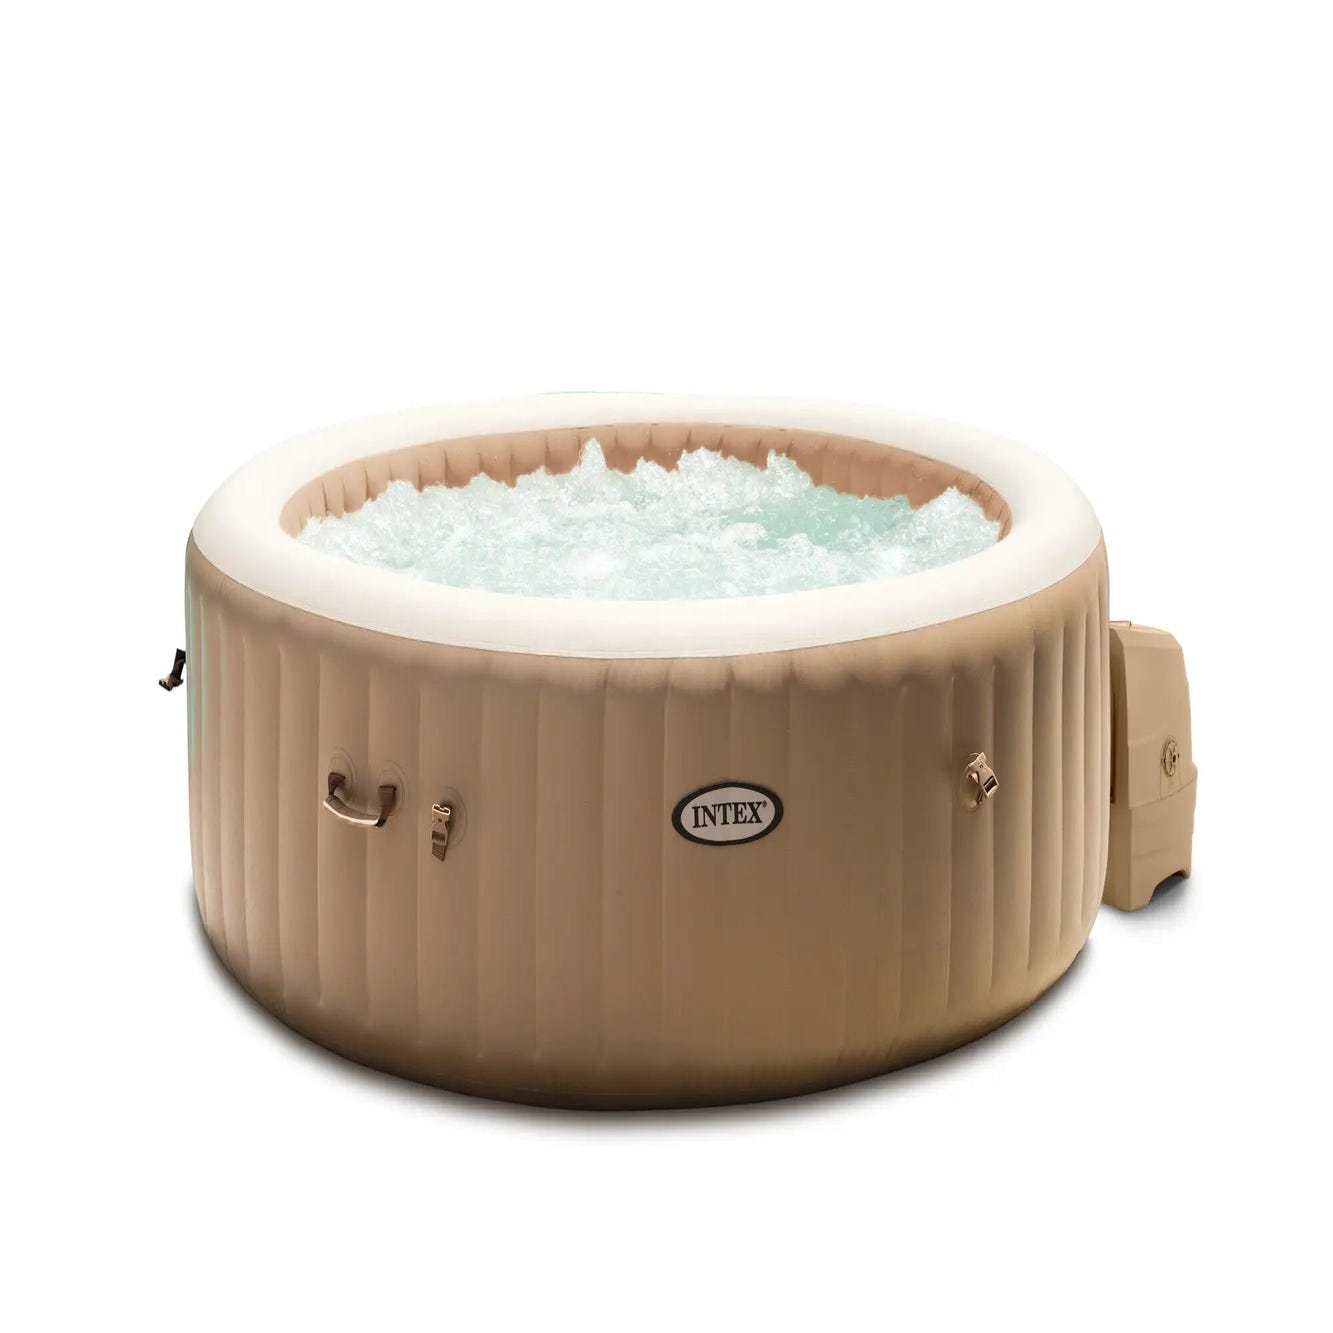 Spa gonflable Intex Pure Spa Carbone 4 places